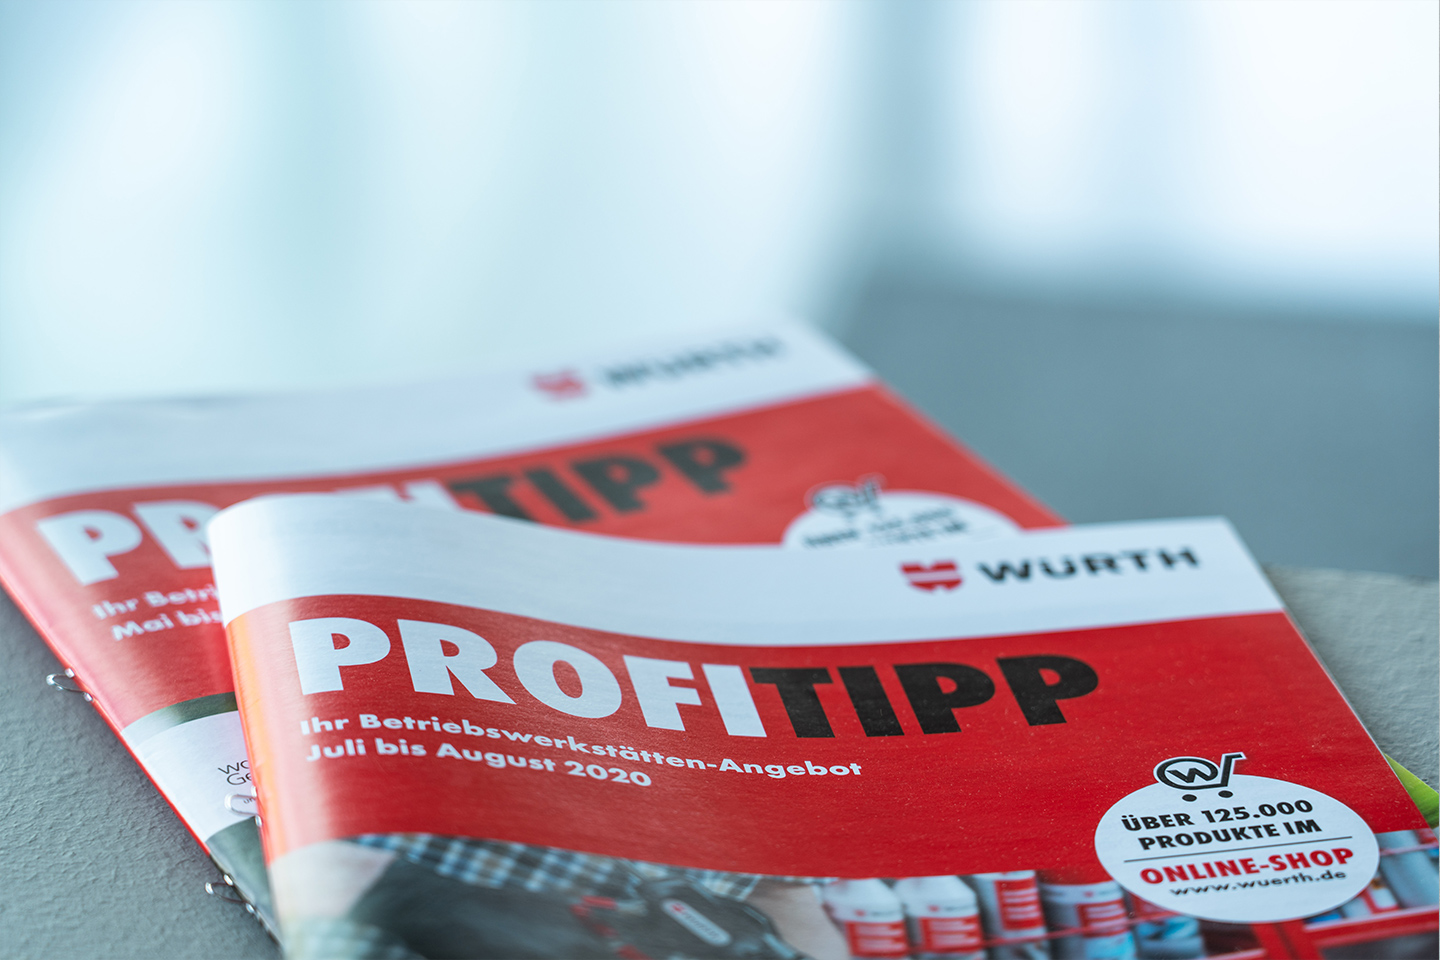 Design of the automatically generated offer brochures Würth Profitipps